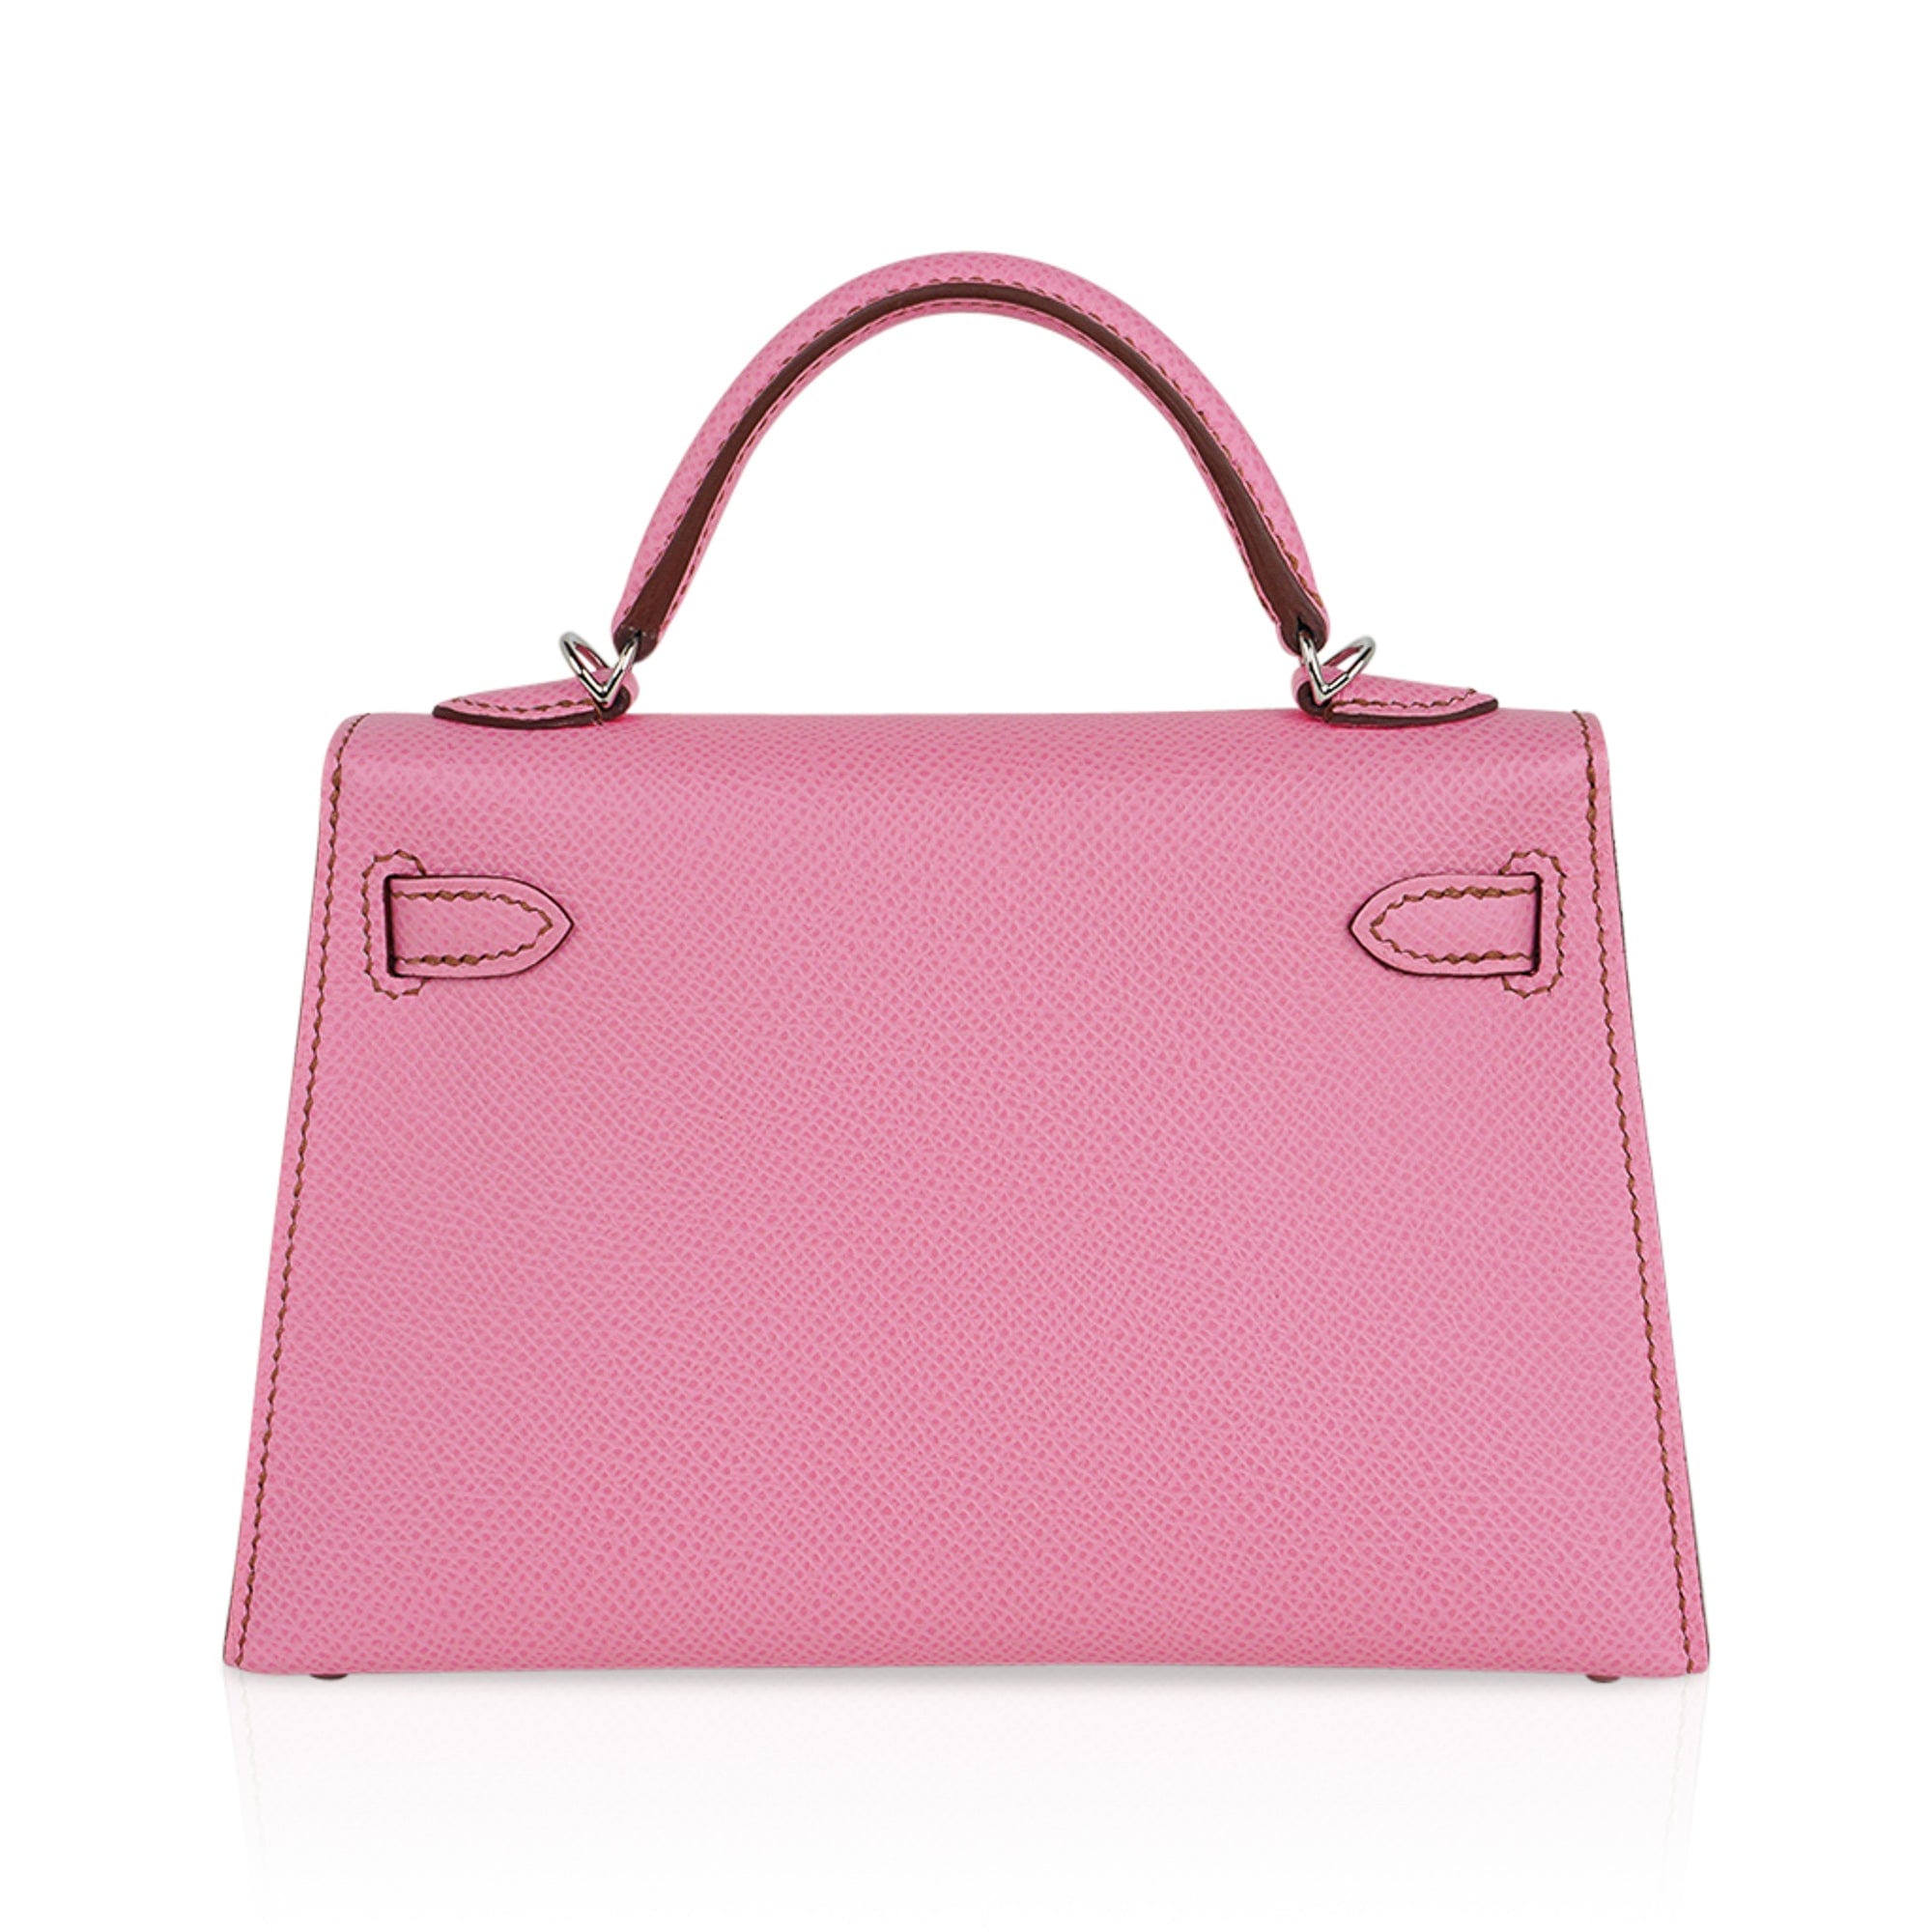 Hermes Mini Kelly 20 Sellier Bag in 5P Pink Bubblegum Epsom Leather wi –  Mightychic